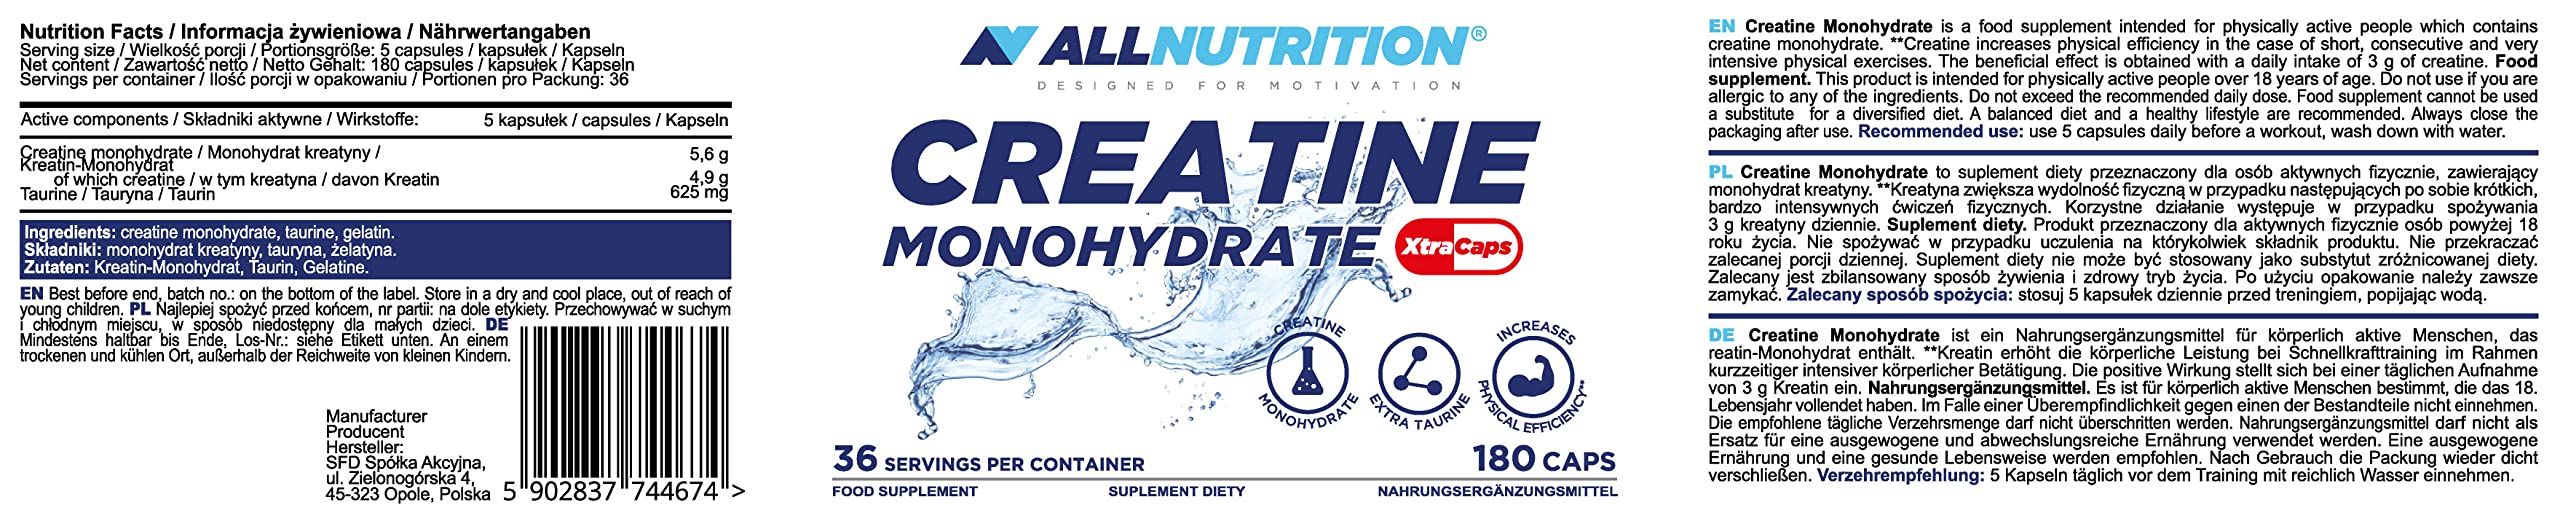 Allnutrition Creatine Monohydrate XtraCaps 180 caps at the cheapest price at MYSUPPLEMENTSHOP.co.uk